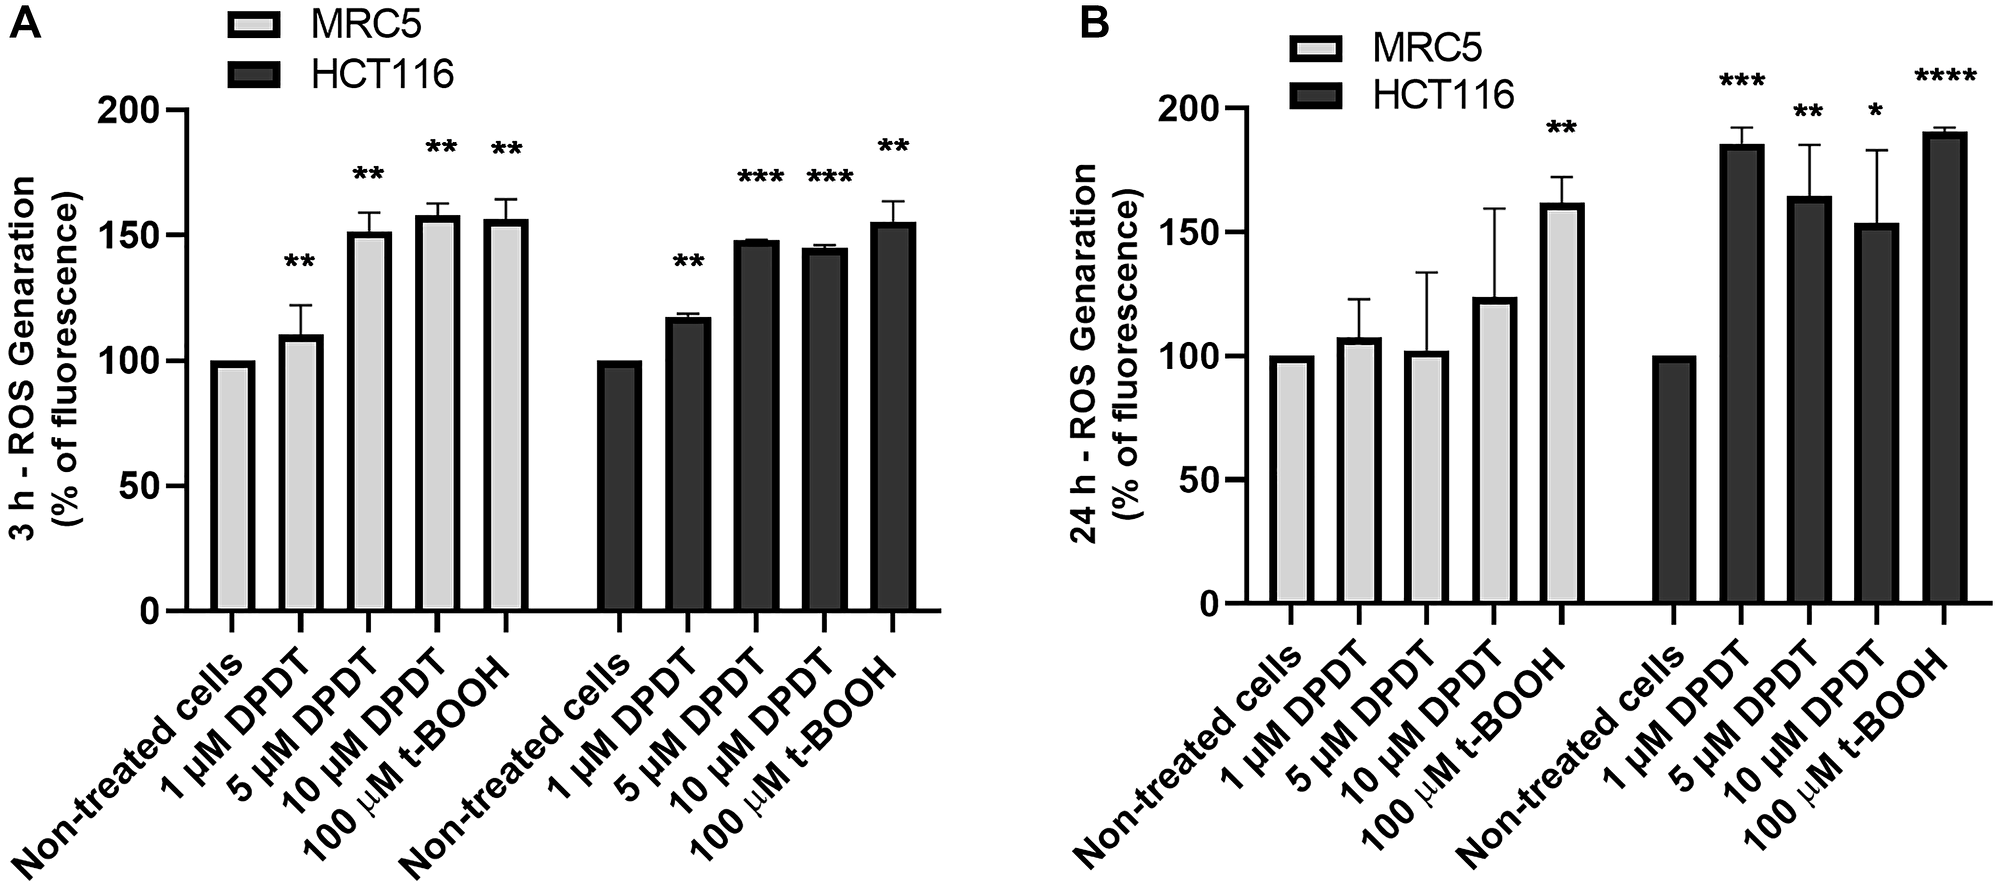 DPDT induces ROS accumulation in HCT116 and MRC5 proliferating cells.